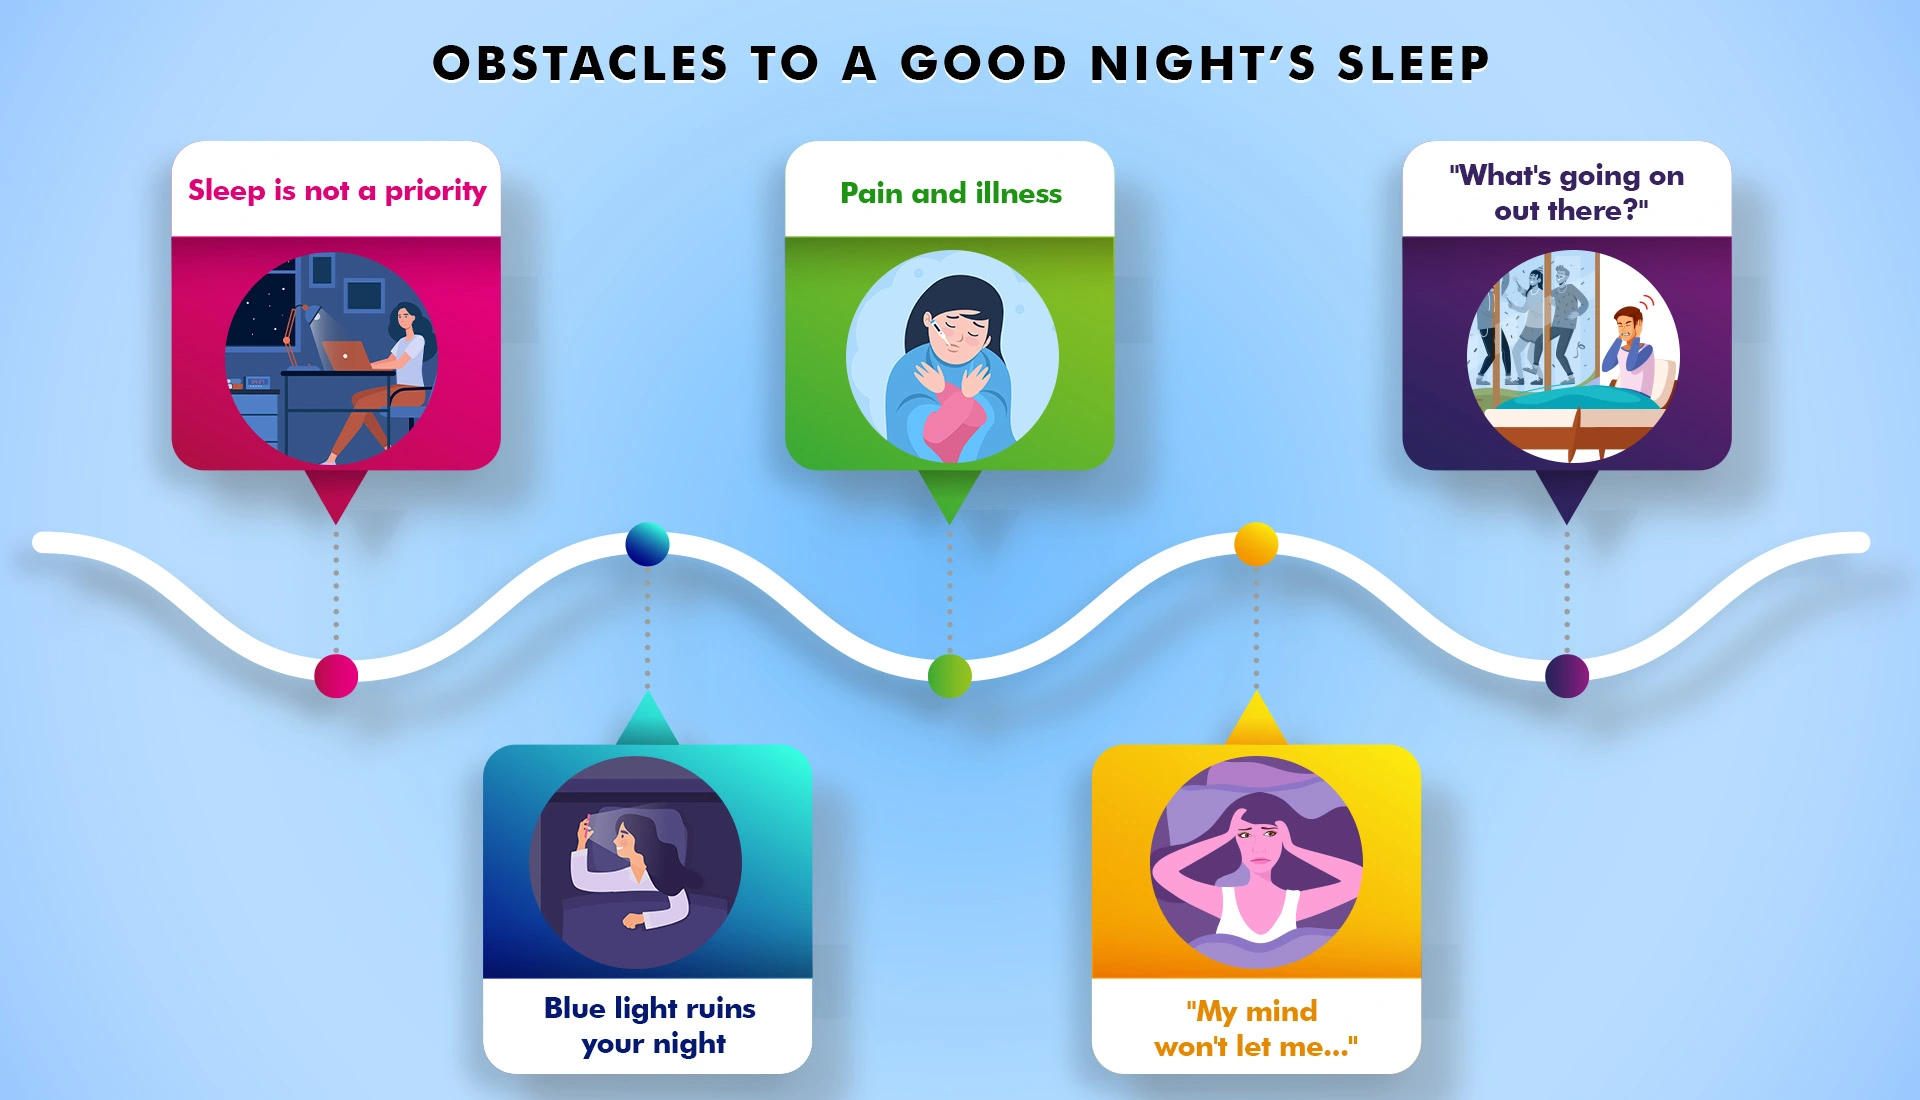 Obstacles to a good night's sleep